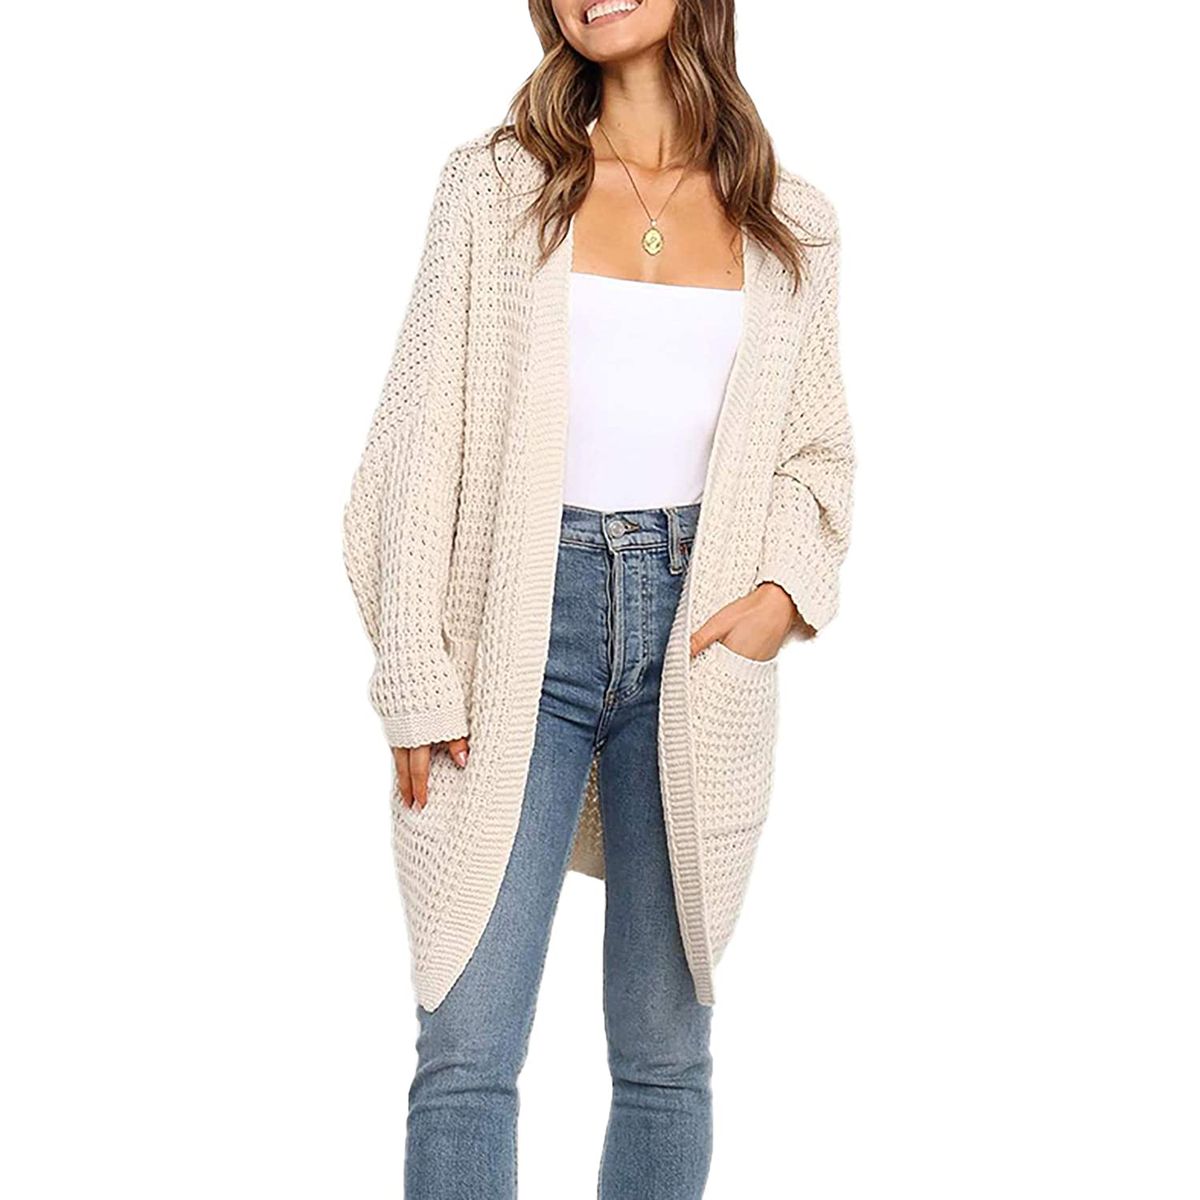 Andongnywell Womens Cardigan Striped Sweaters Open Front Colorblock Knit Coat Outwear Boho Pockets Loose Long Pullover 